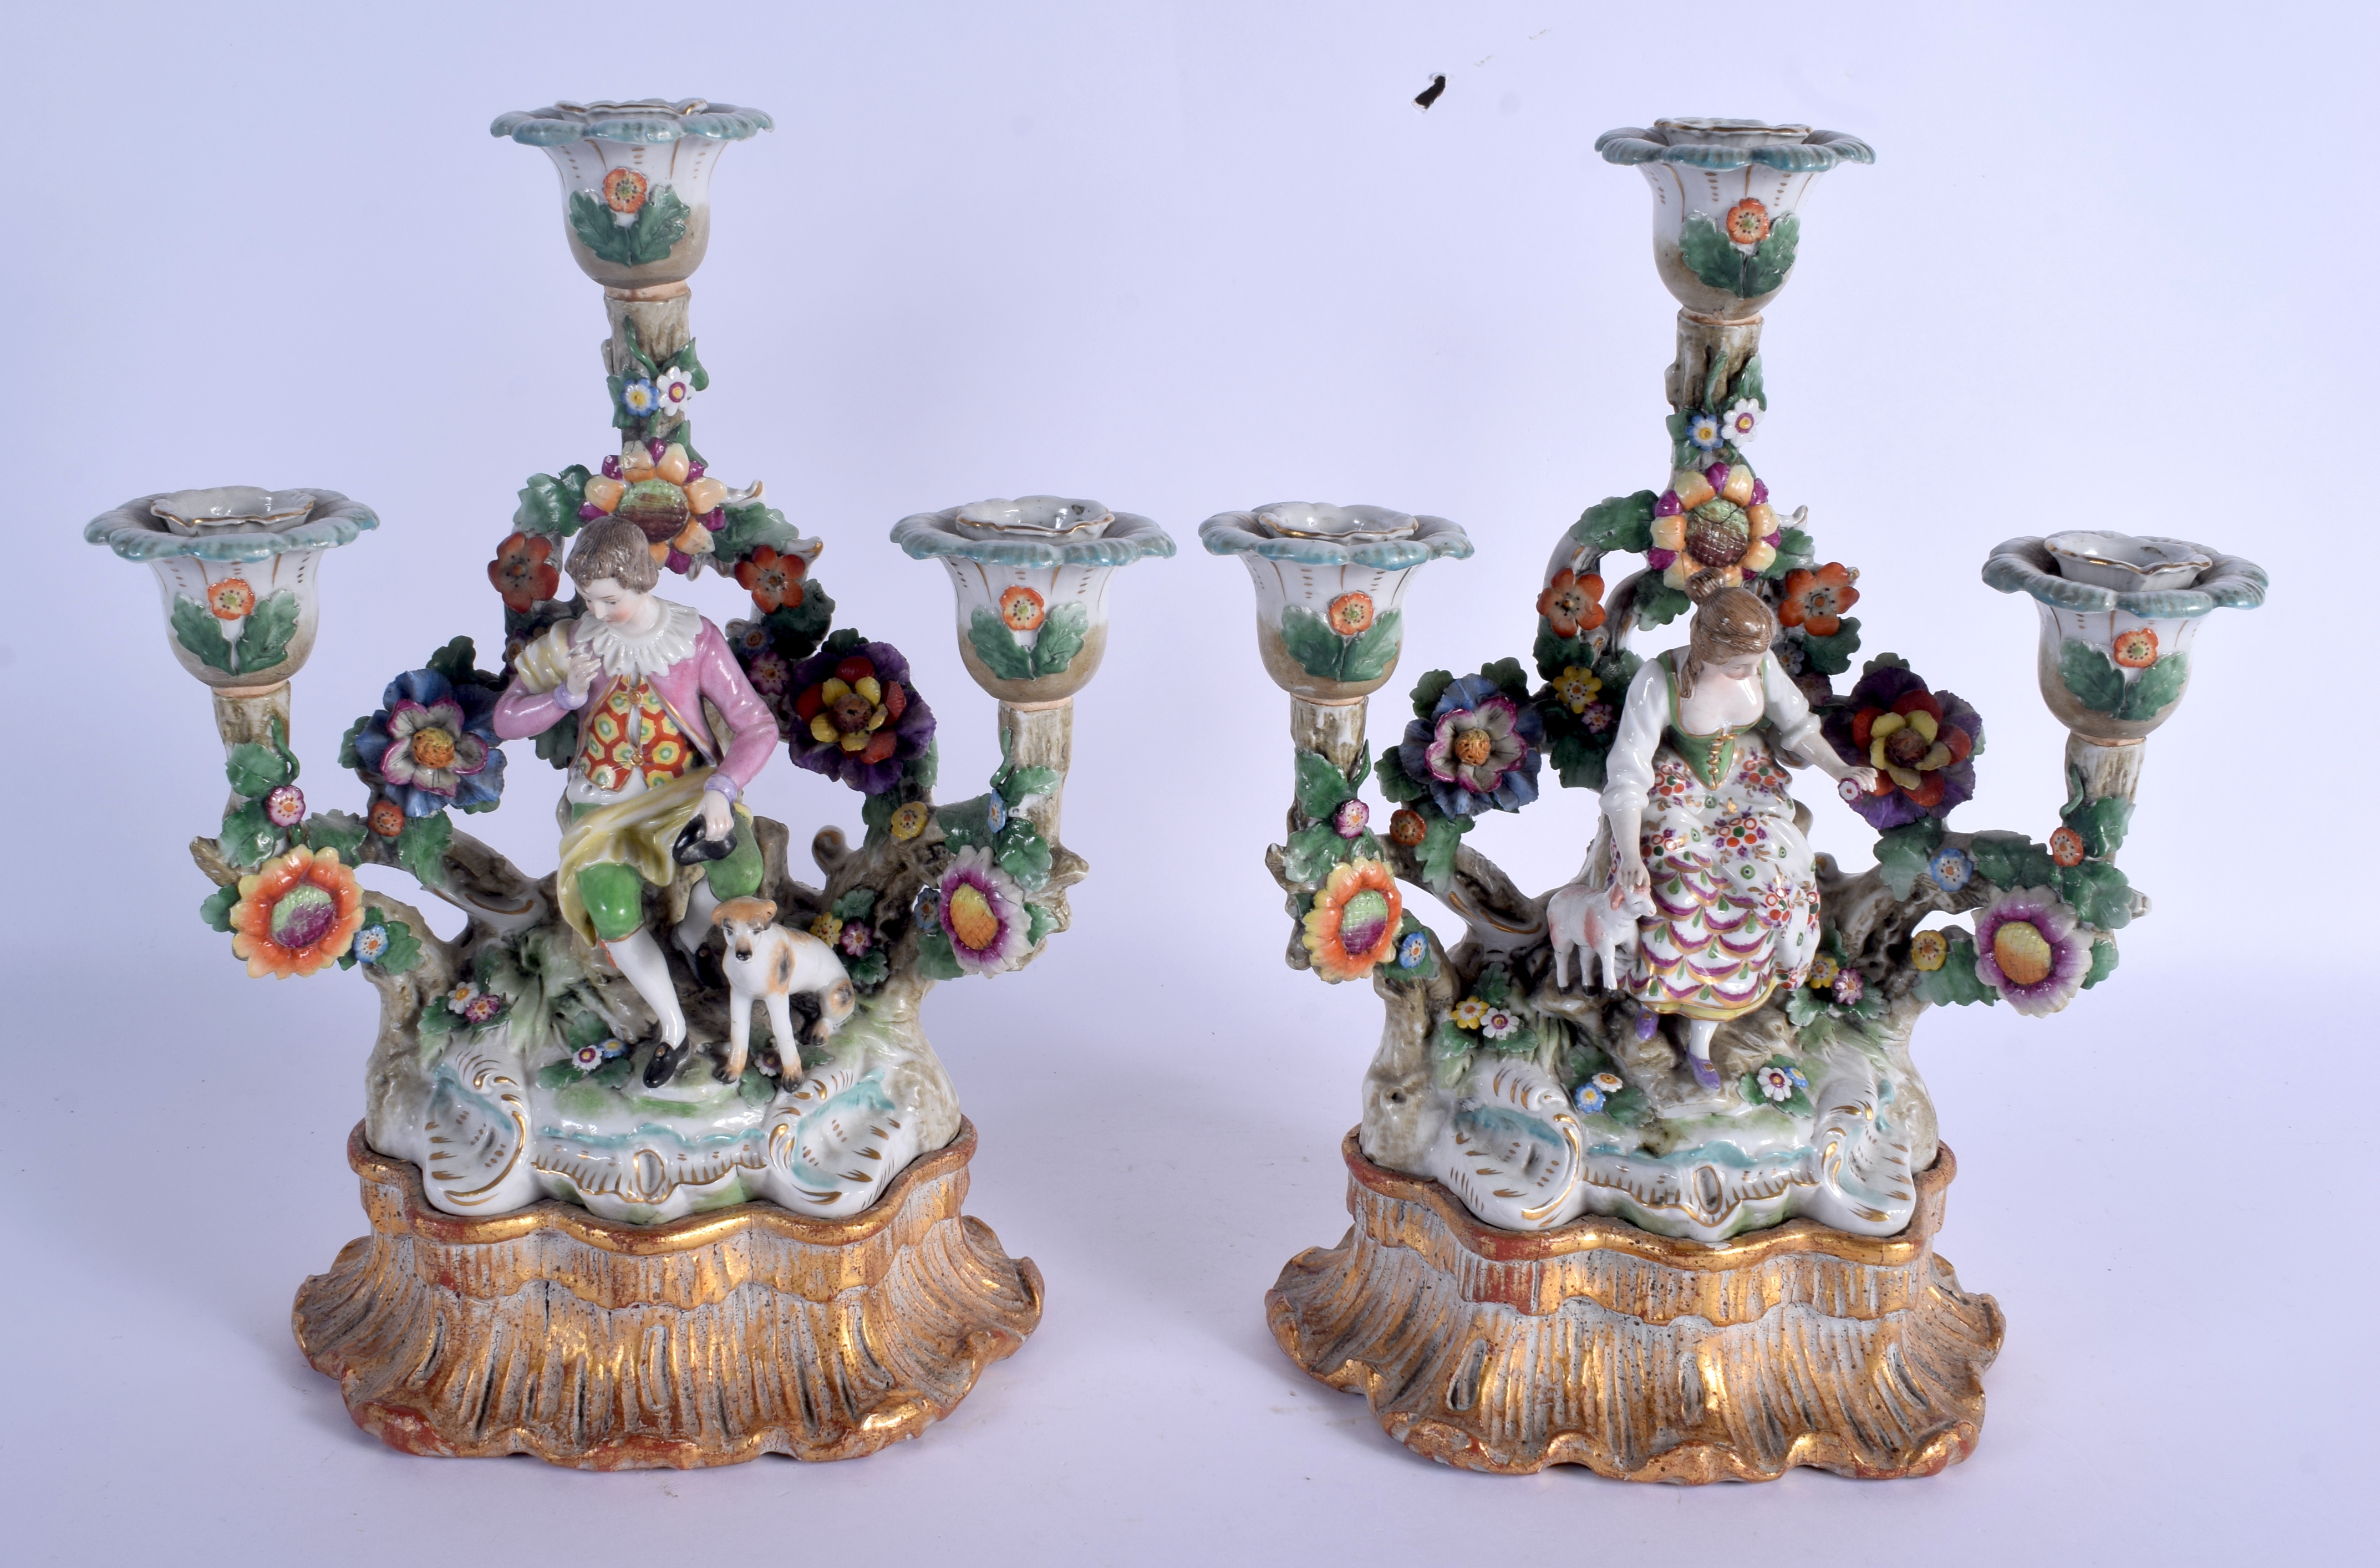 A PAIR OF 19TH CENTURY CONTINENTAL PORCELAIN FIGURES modelled upon a rococo base. Porcelain 26 cm x